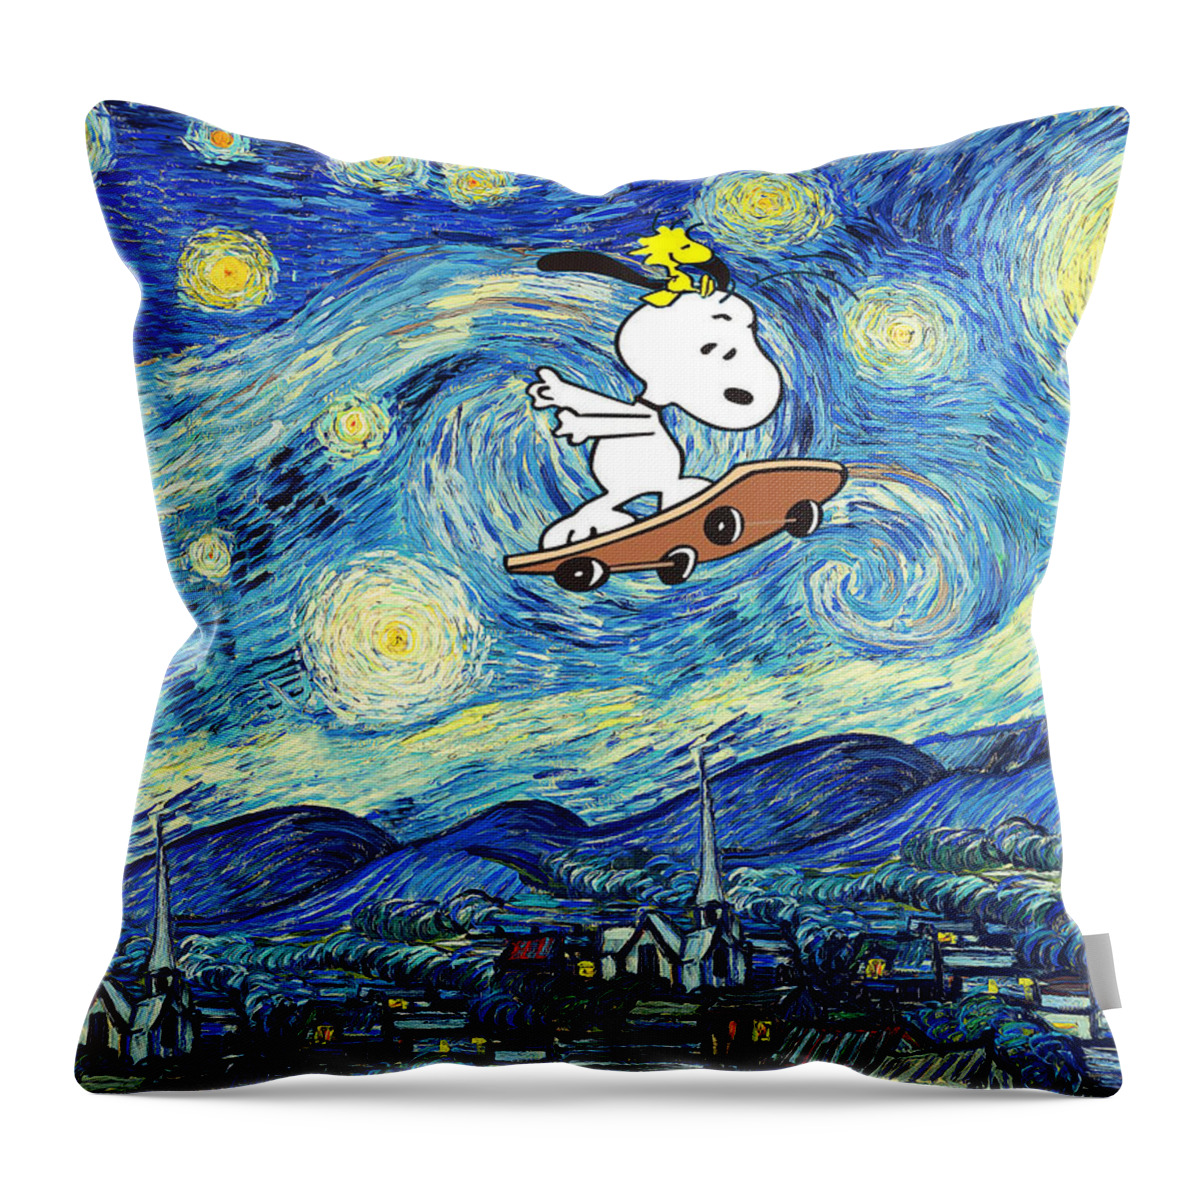 Snoopy -starry Night - Starry Night Van Gogh Throw Pillow featuring the digital art Snoopy -Starry Night by Linyan Chen